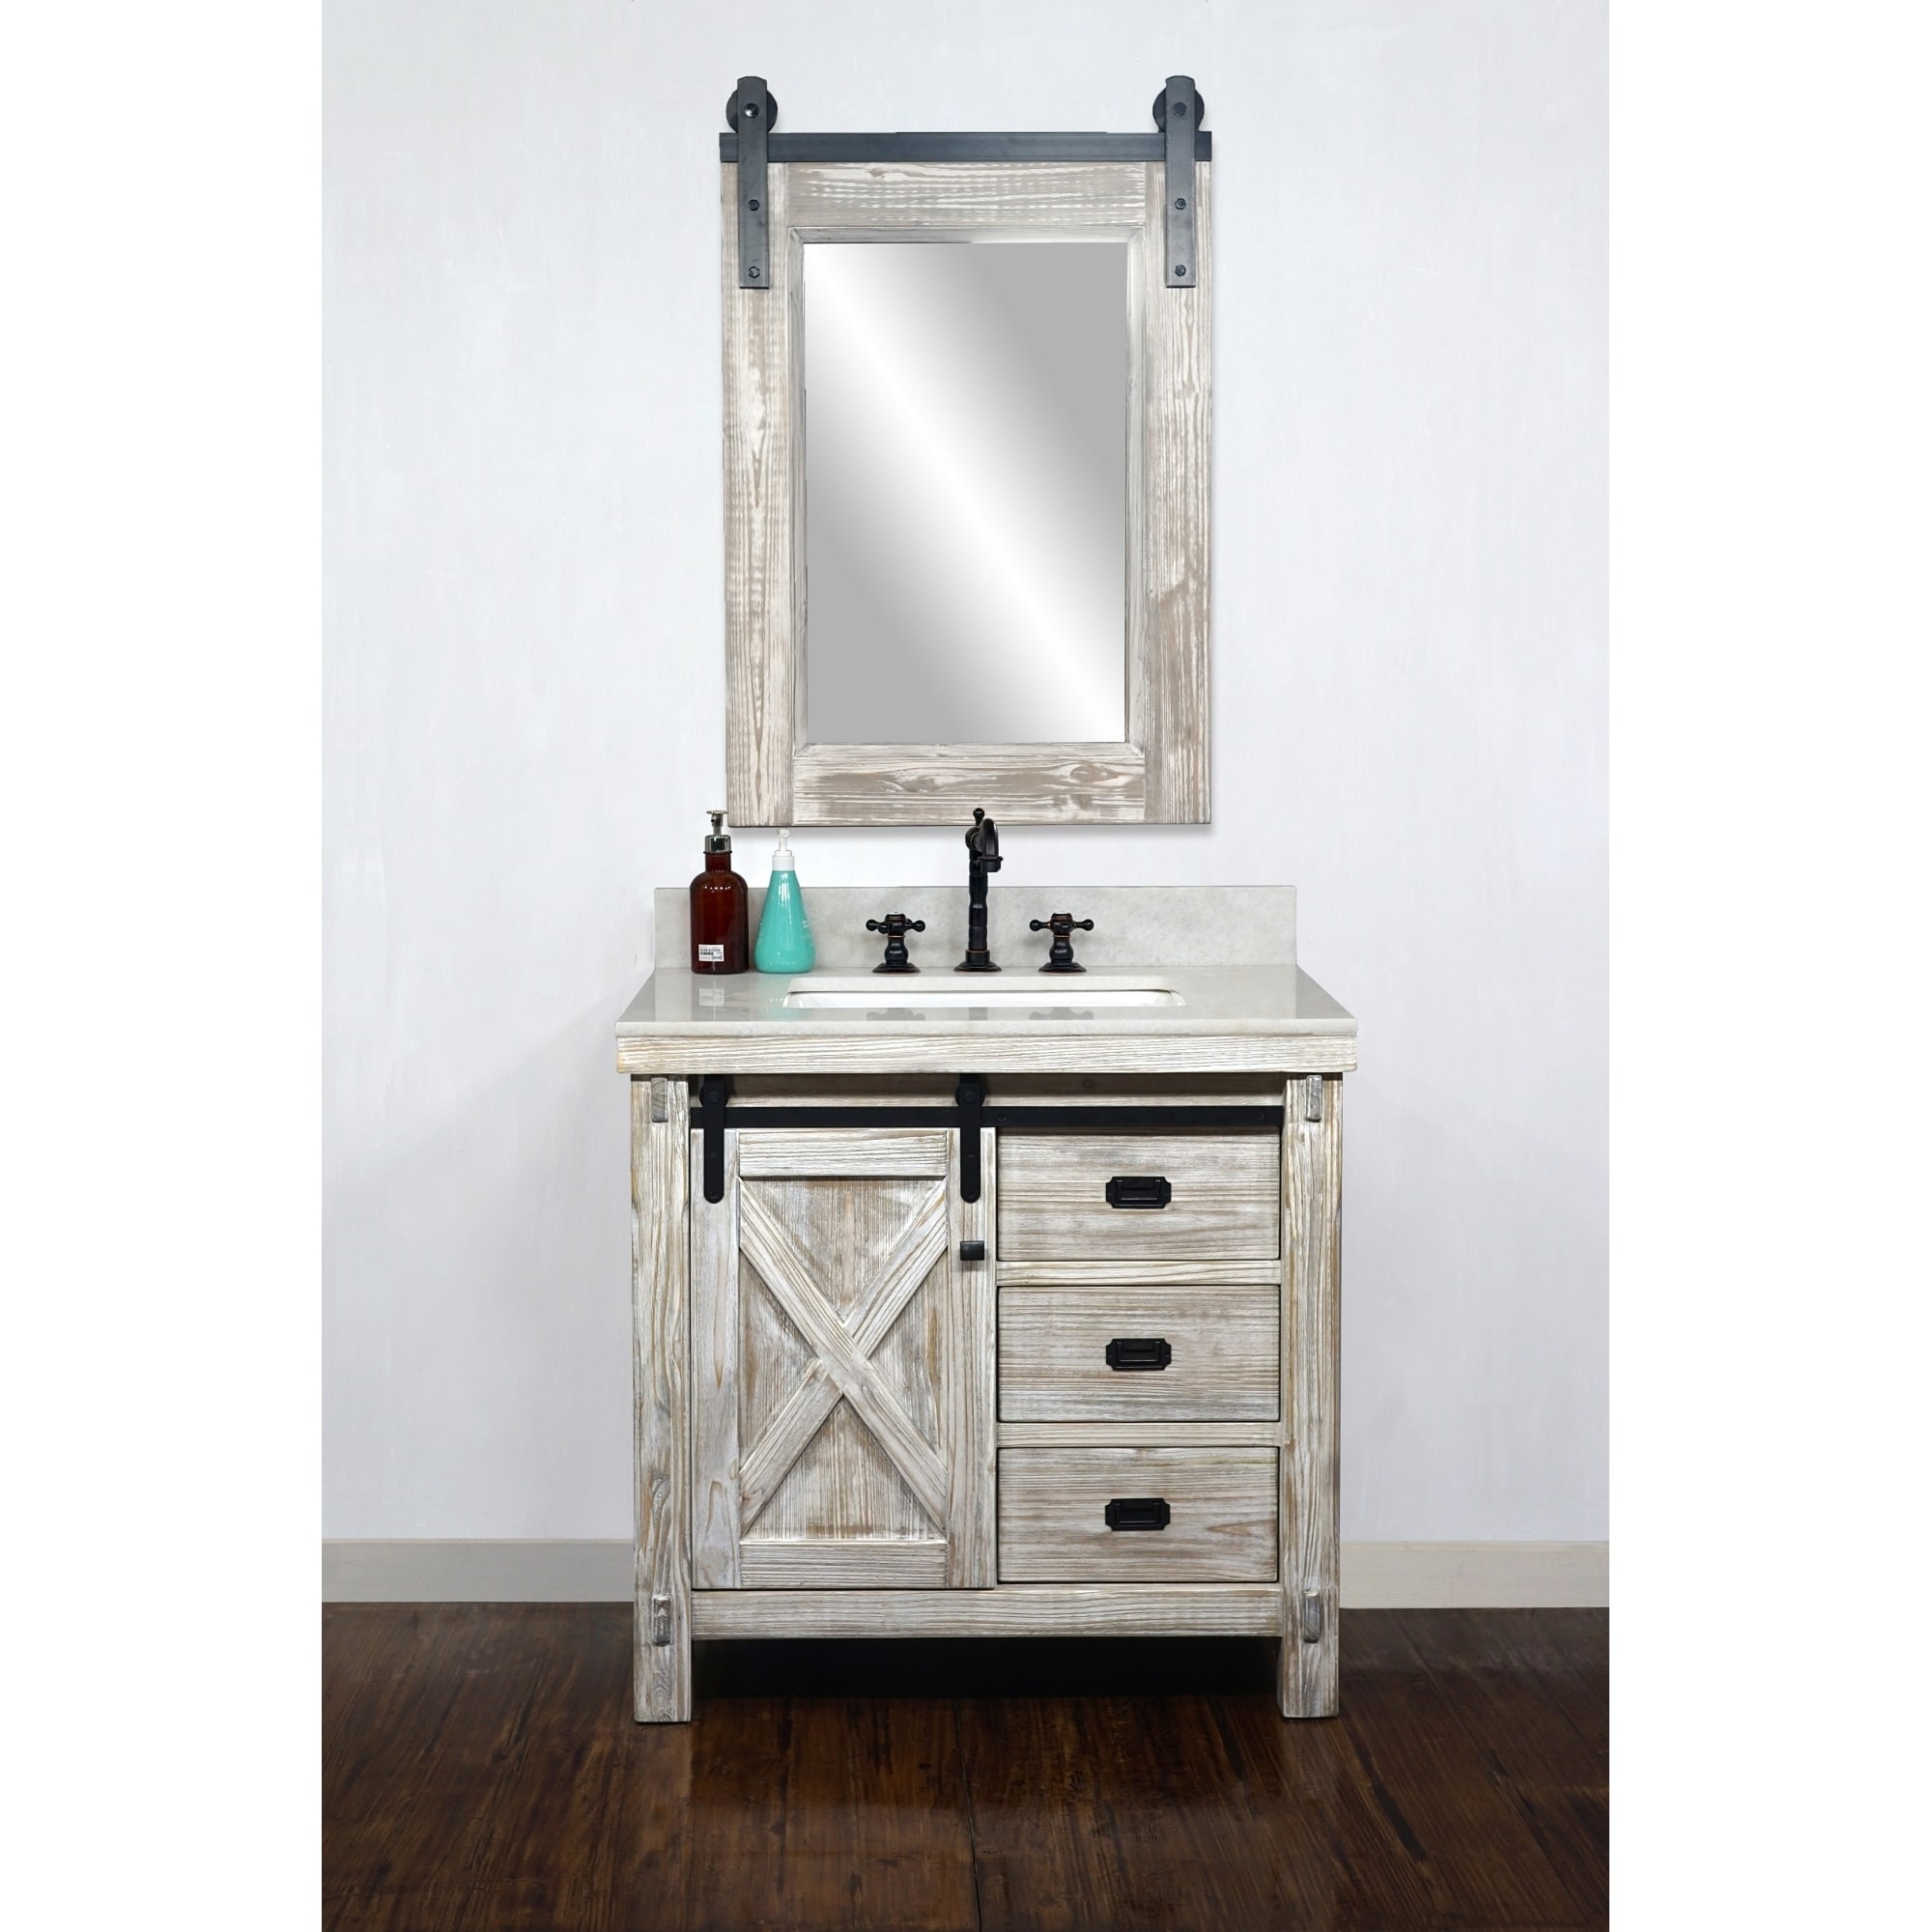 37 Rustic Solid Fir Barn Door Style Single Sink White Wash Finish Vanity With Marble Or